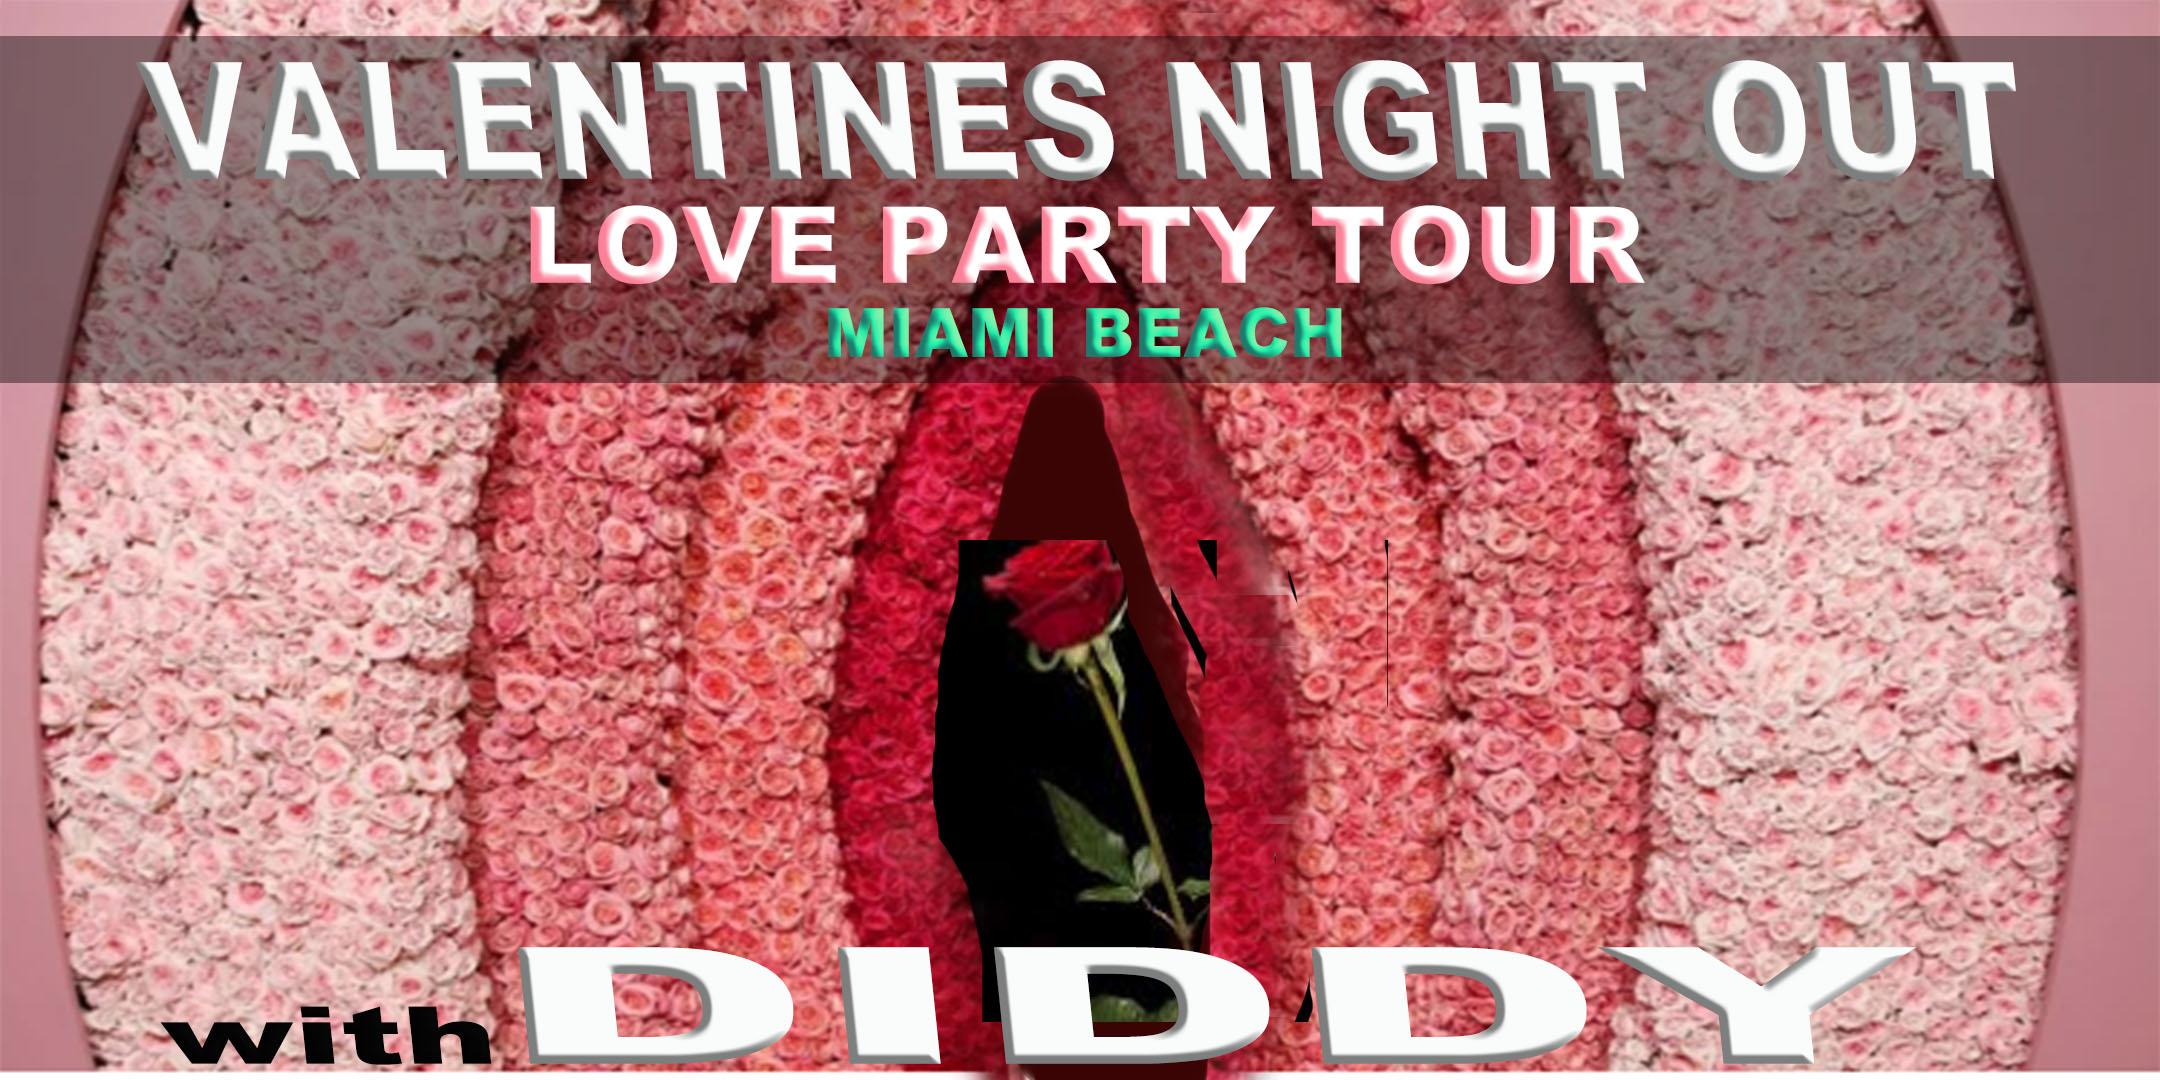 VALENTINES NIGHT - LOVE PARTY TOUR Experiences in Miami Beach